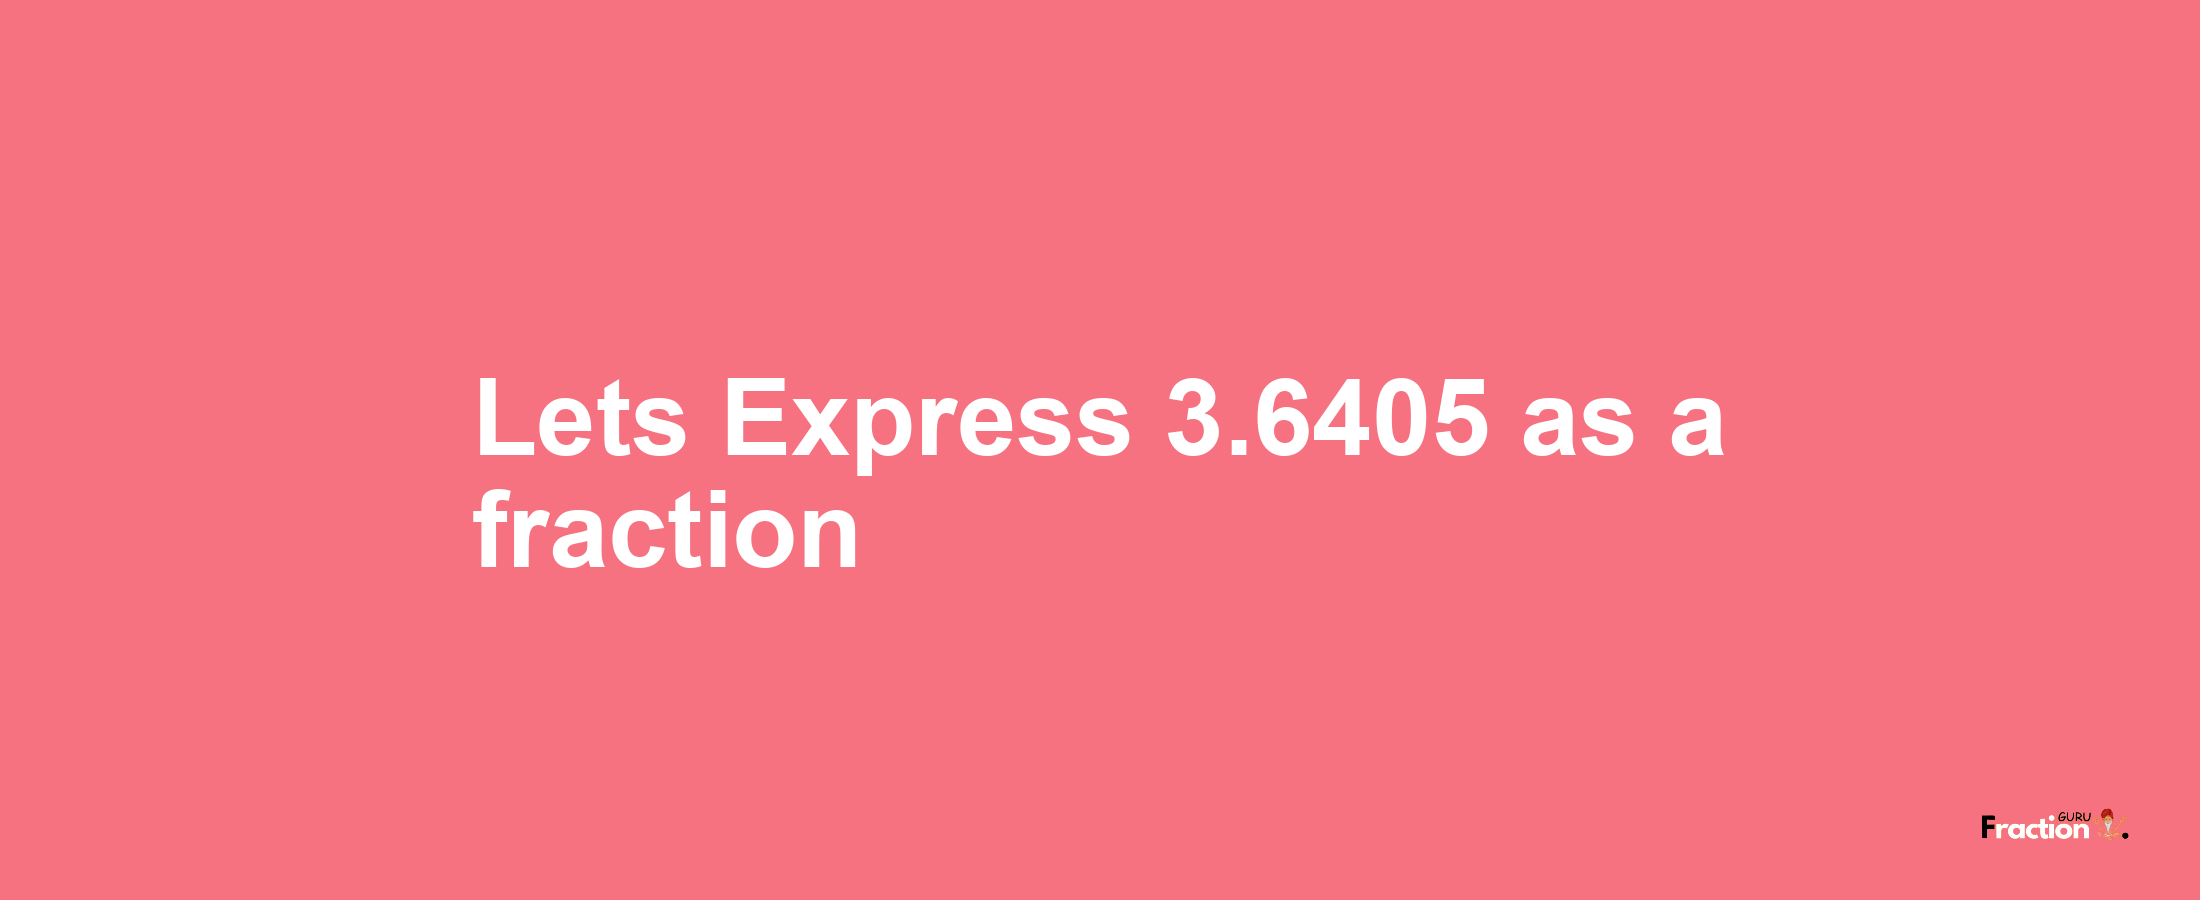 Lets Express 3.6405 as afraction